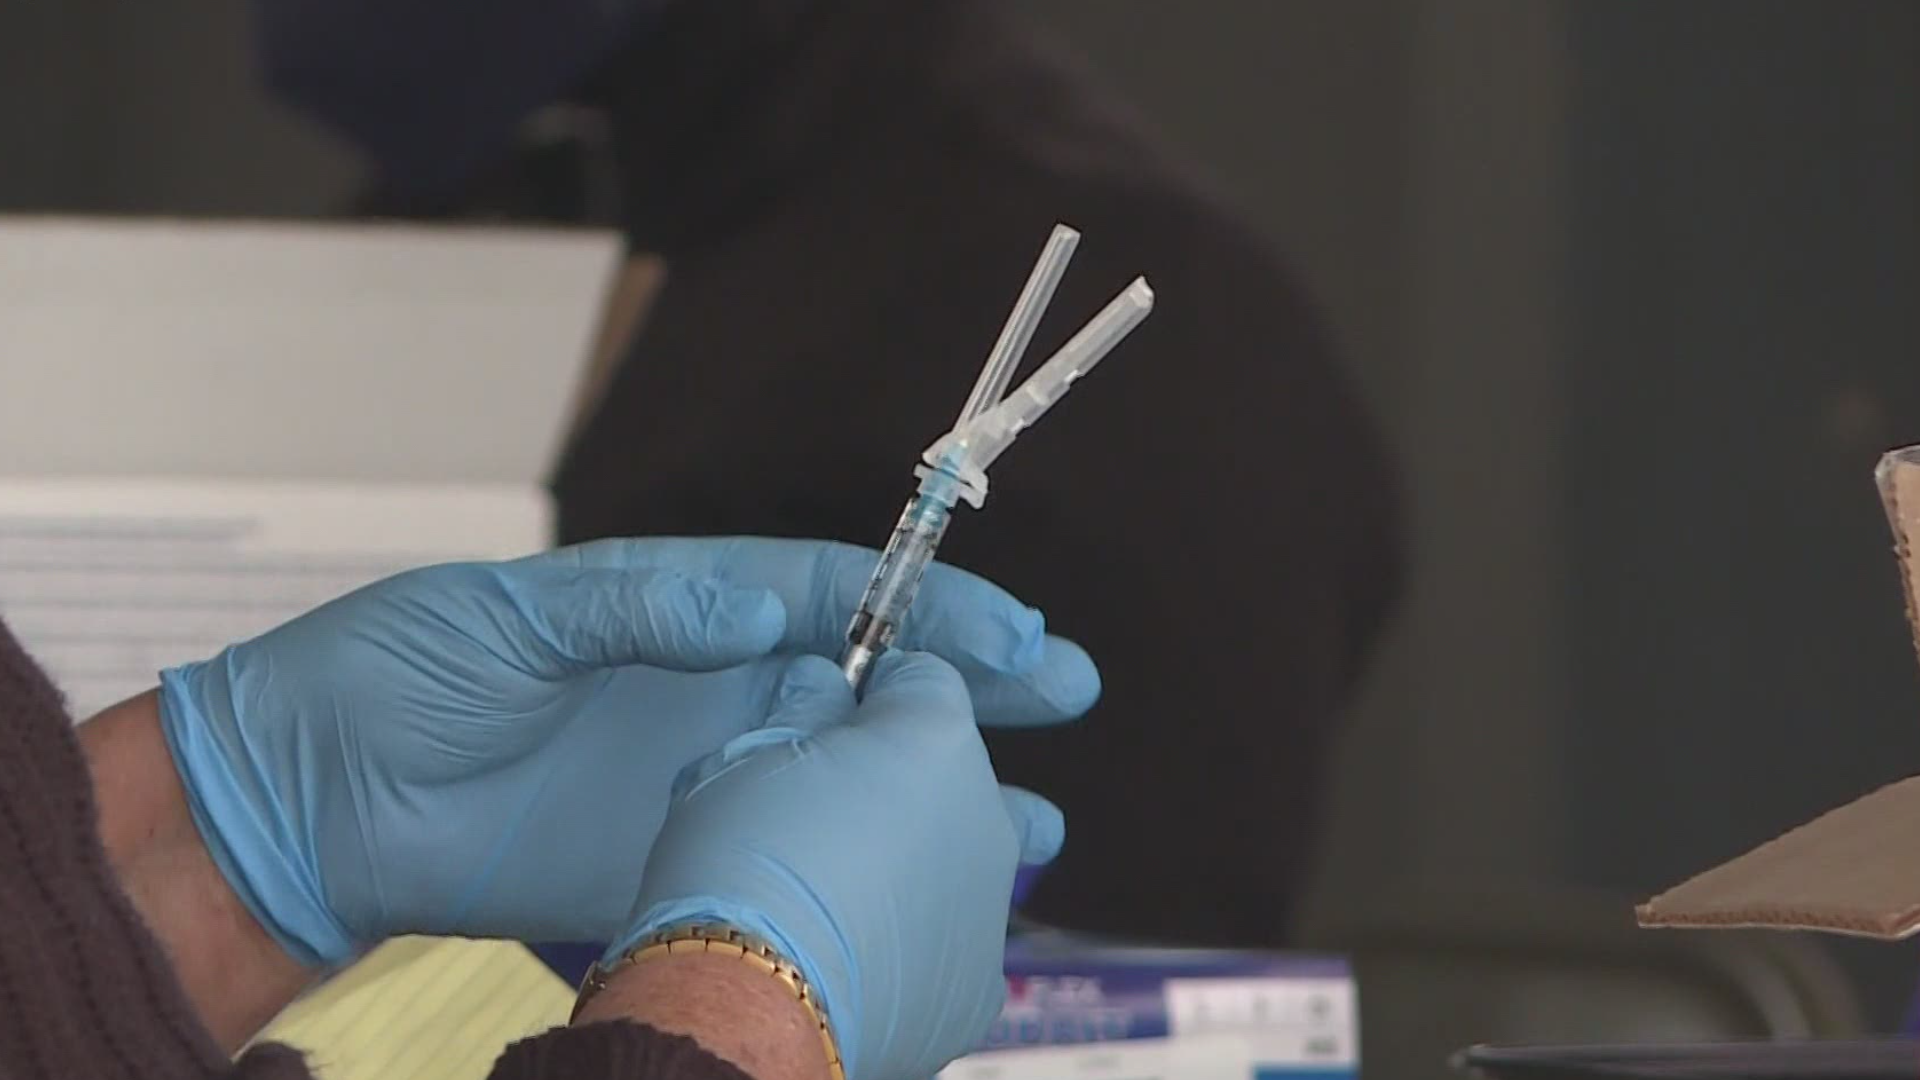 After a confusing three-week start to vaccinating people 65 and up, county leaders are now calling every person due for their second dose.